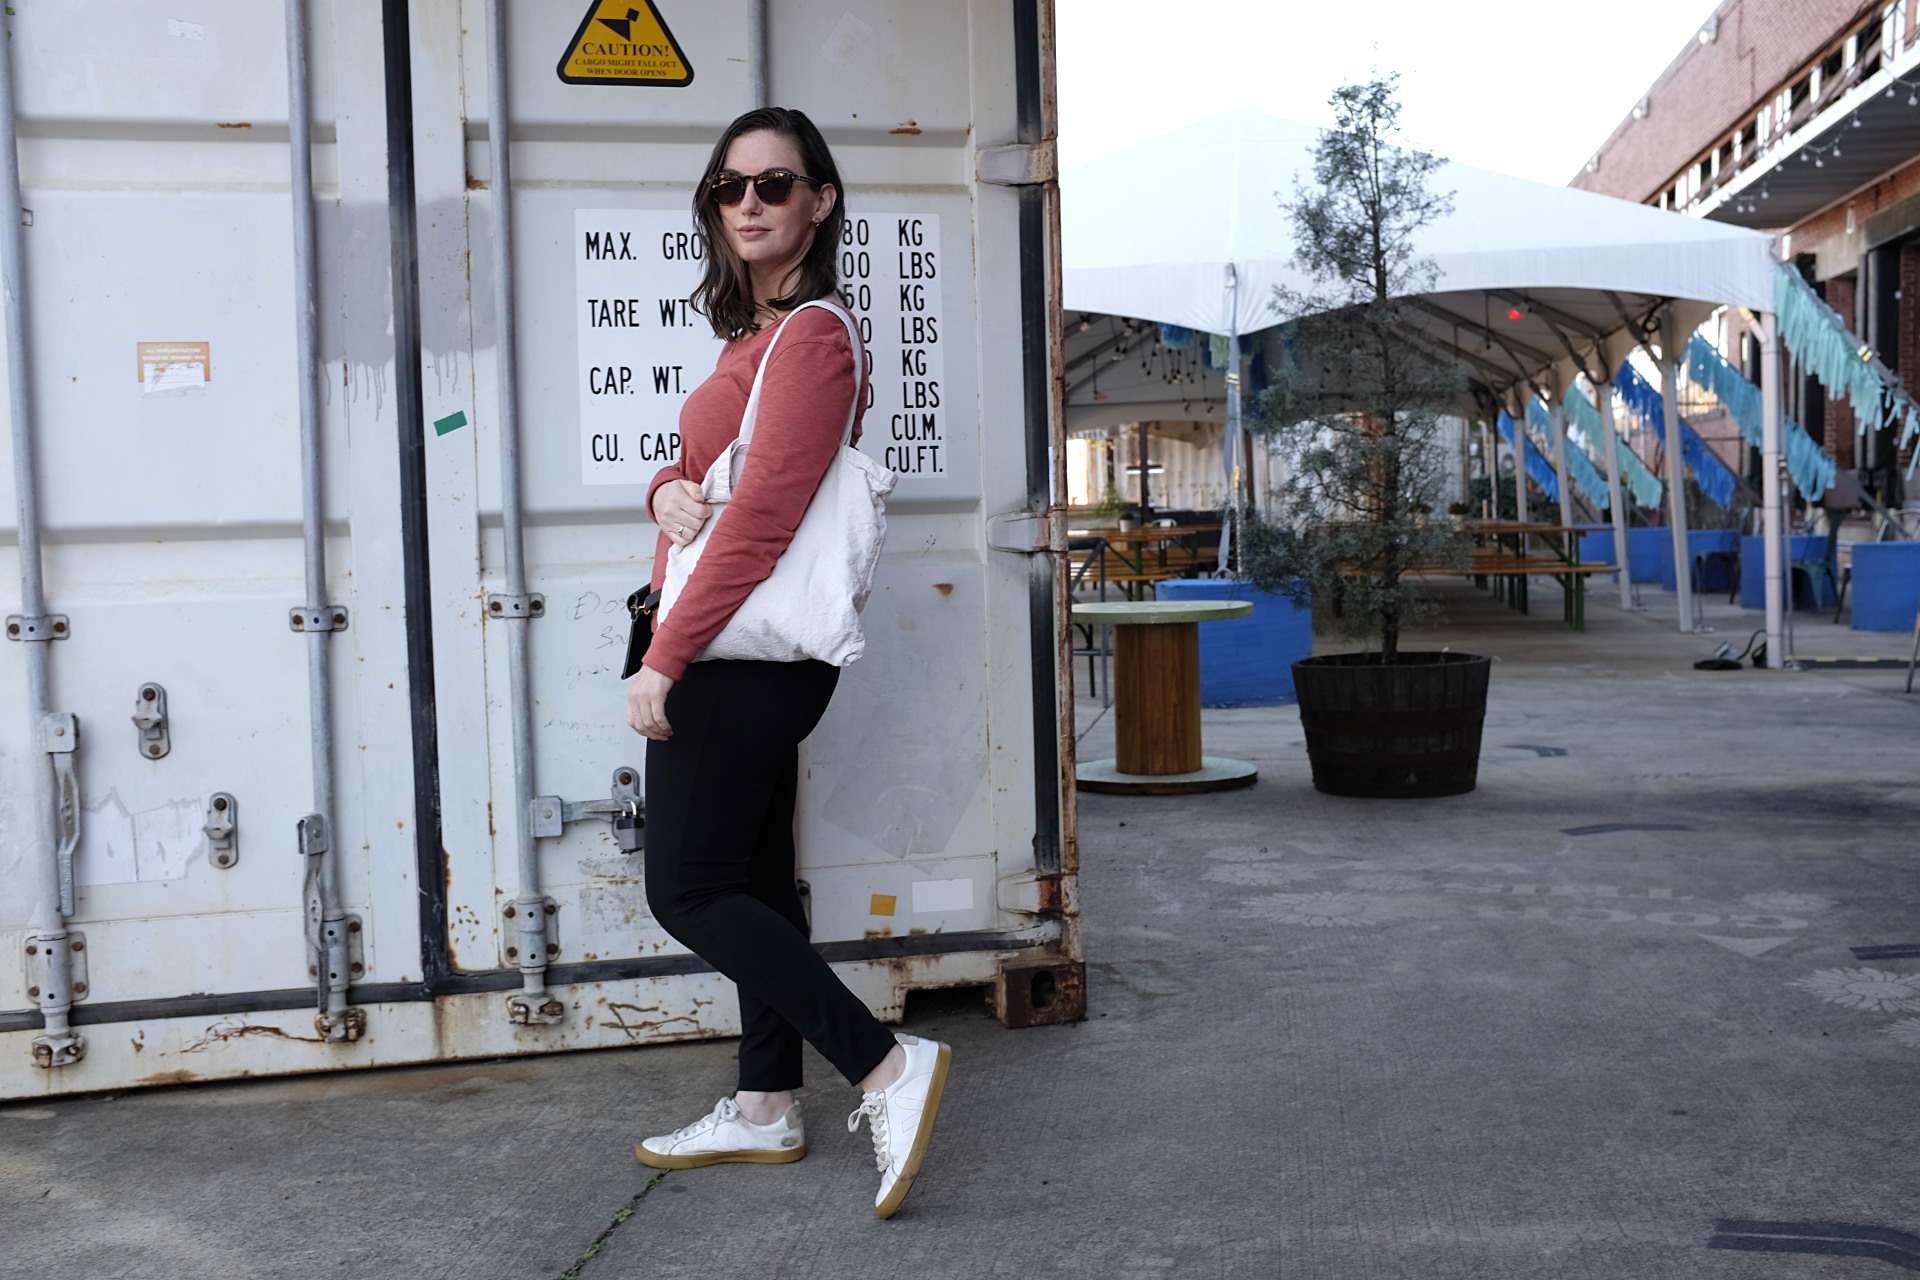 A white woman stands in front of a shipping container, which is in front of a large tent. She is wearing a red-orange long sleeve tee, black pants, white sneakers, a black belt bag, tortiseshell sunglasses, and is carrying a tote. She is facing the camera but her body is pointed to the left.